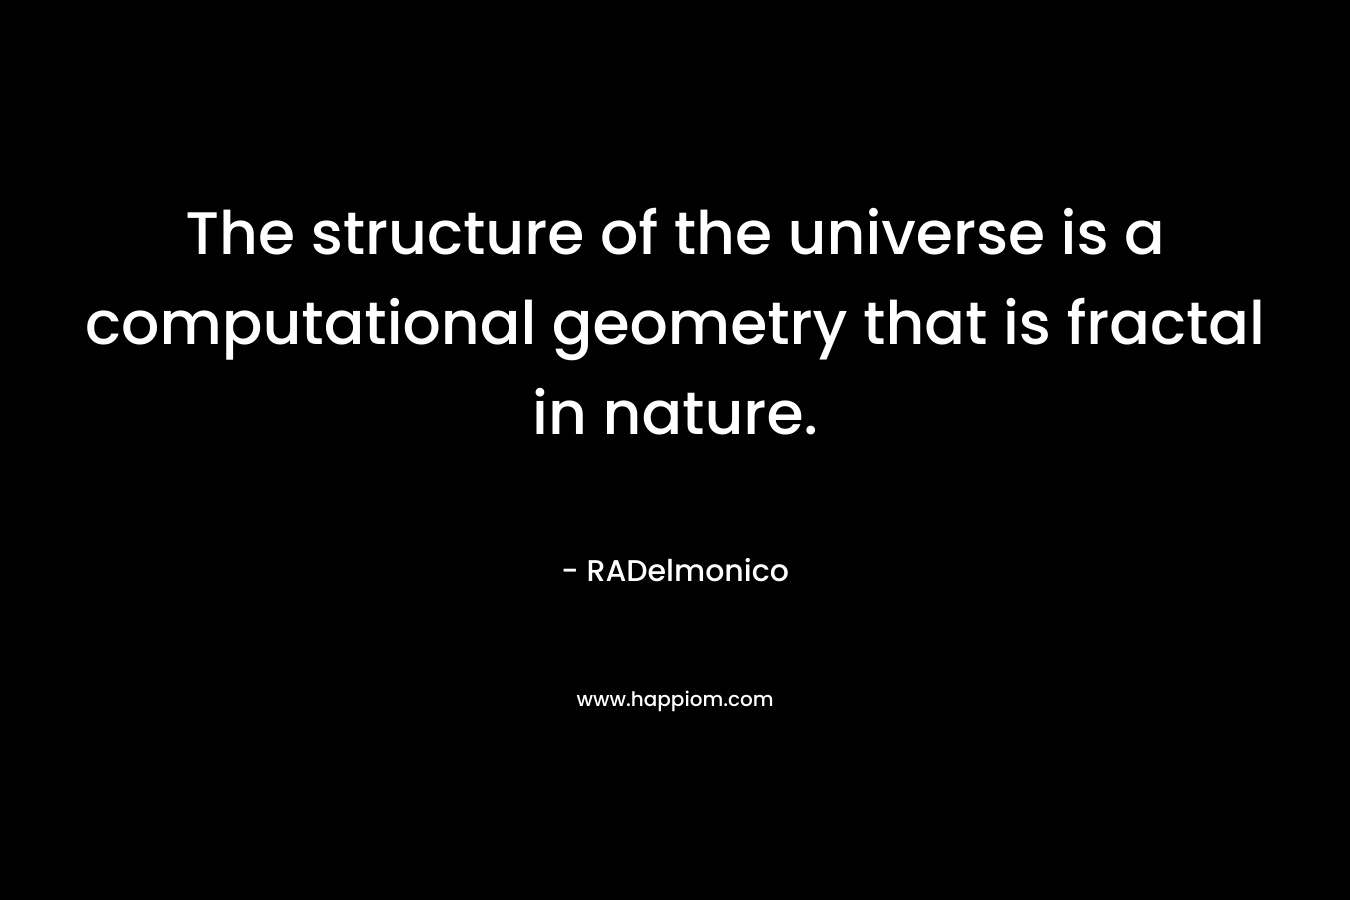 The structure of the universe is a computational geometry that is fractal in nature.